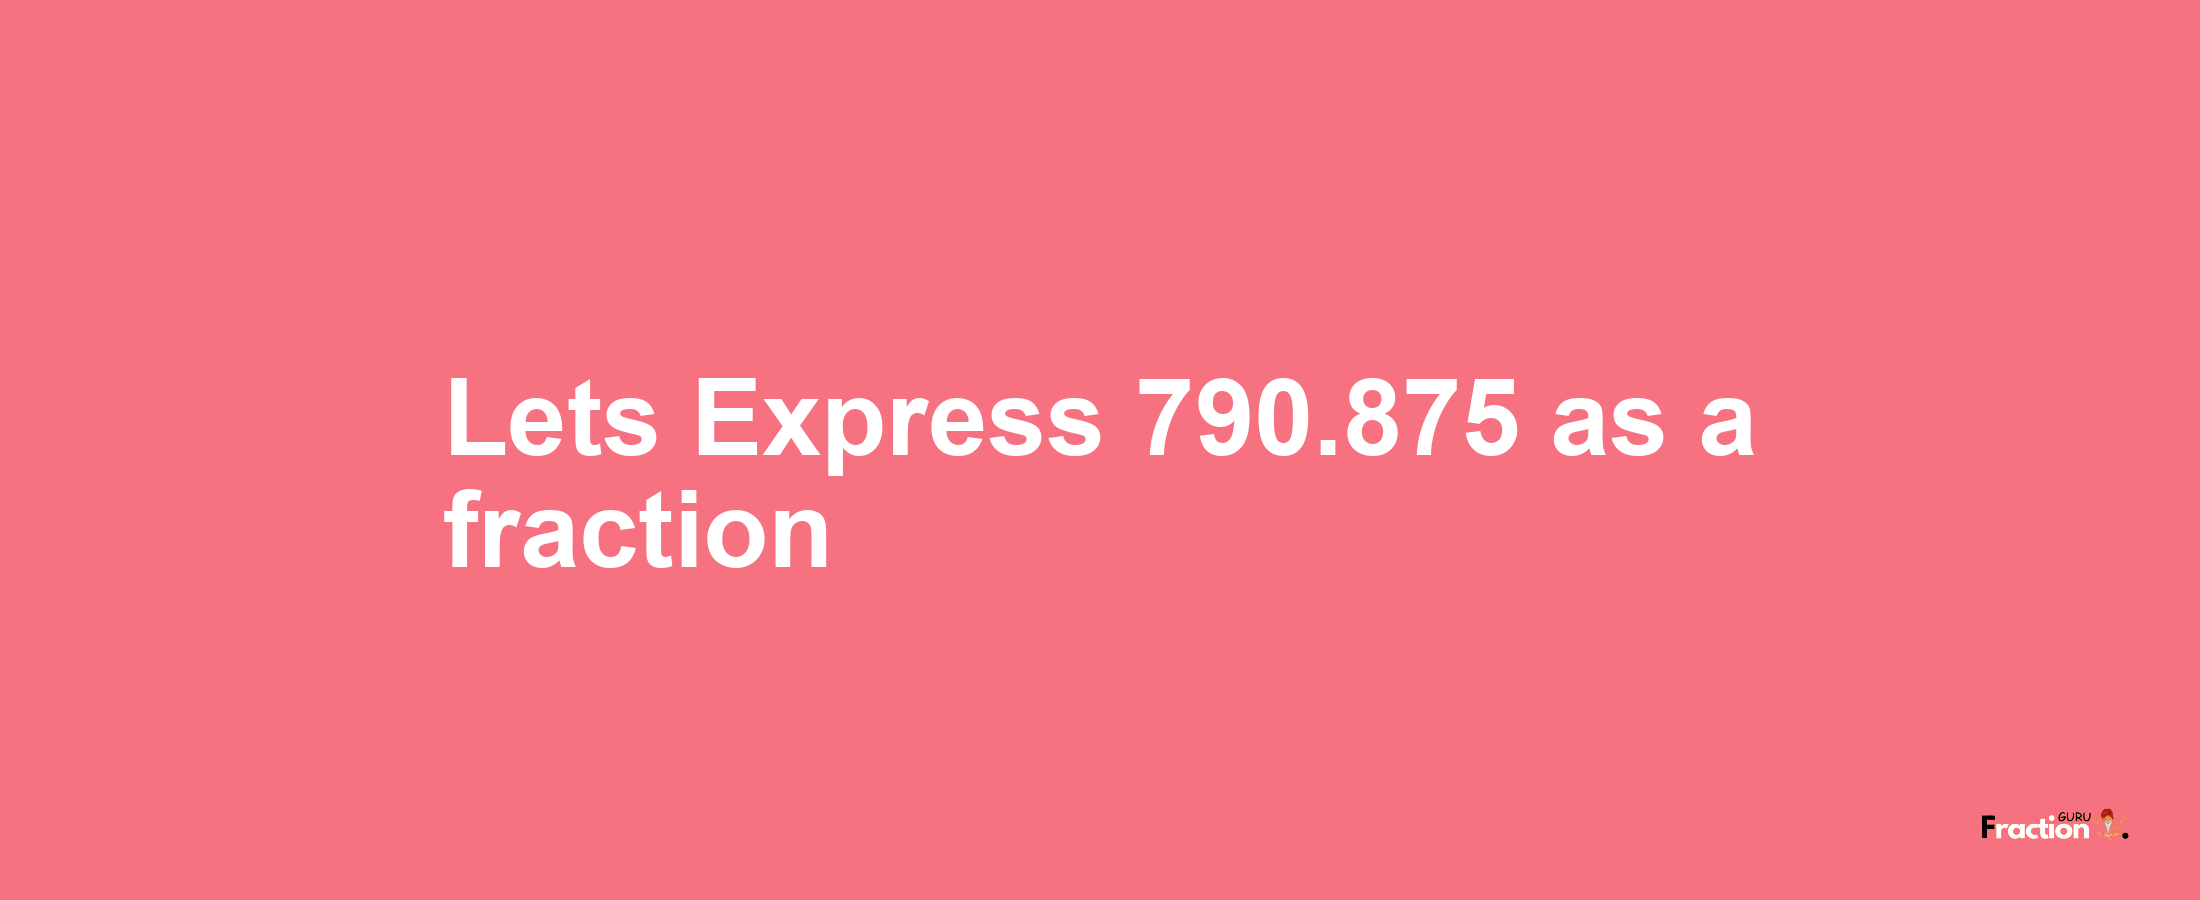 Lets Express 790.875 as afraction